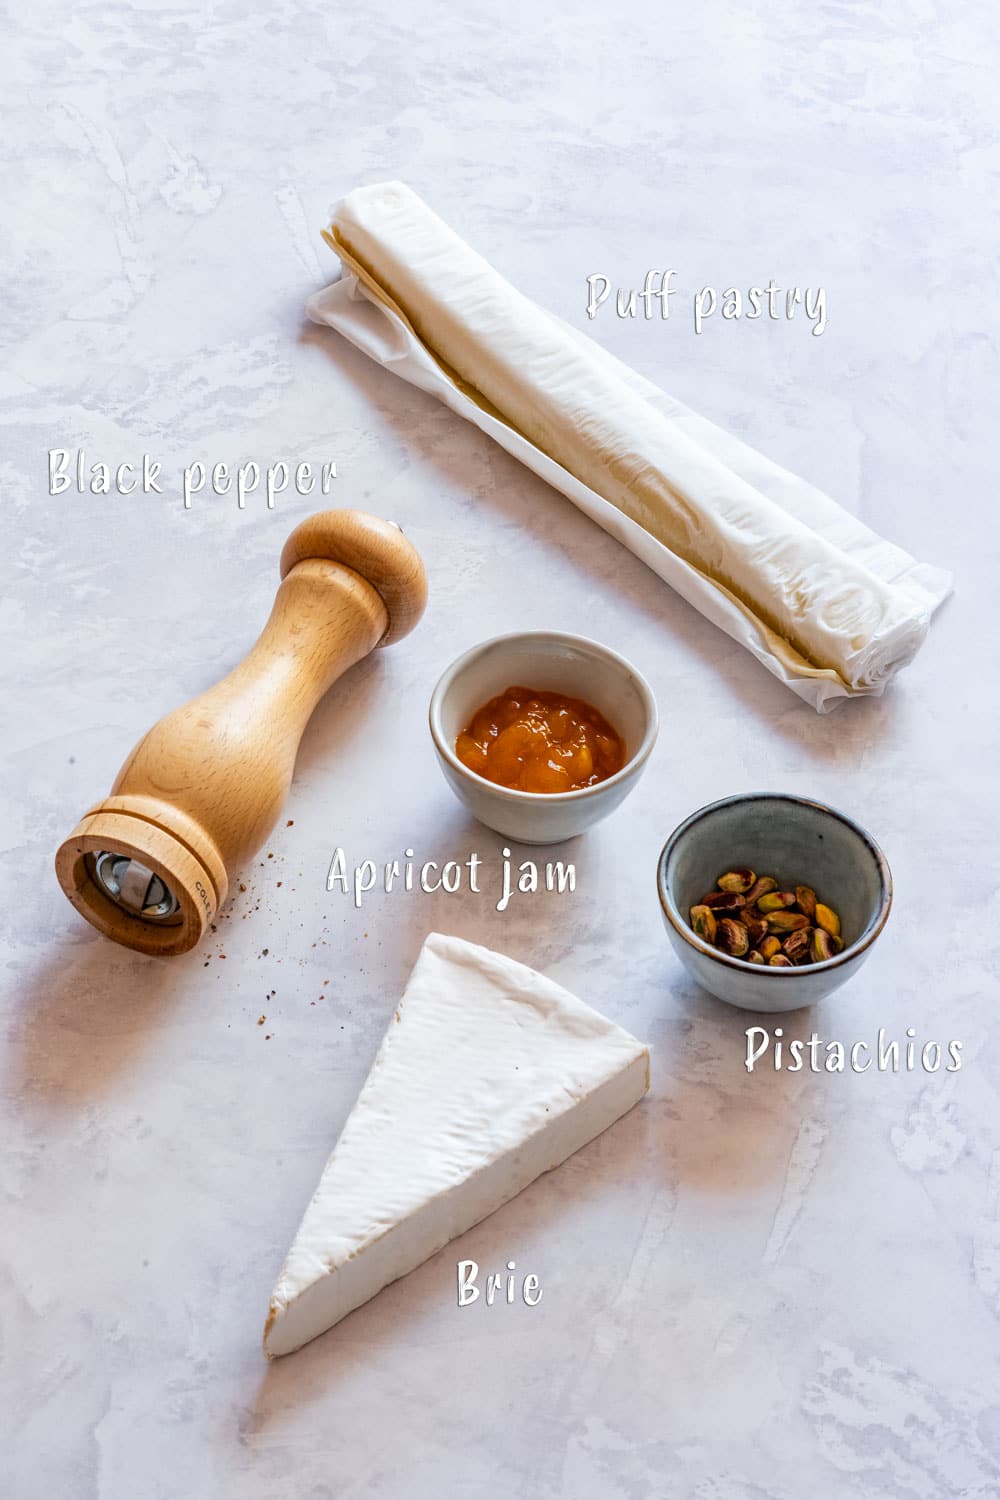 Ingredients of brie bites: puff pastry, brie, apricot jam, pistachios and black pepper.